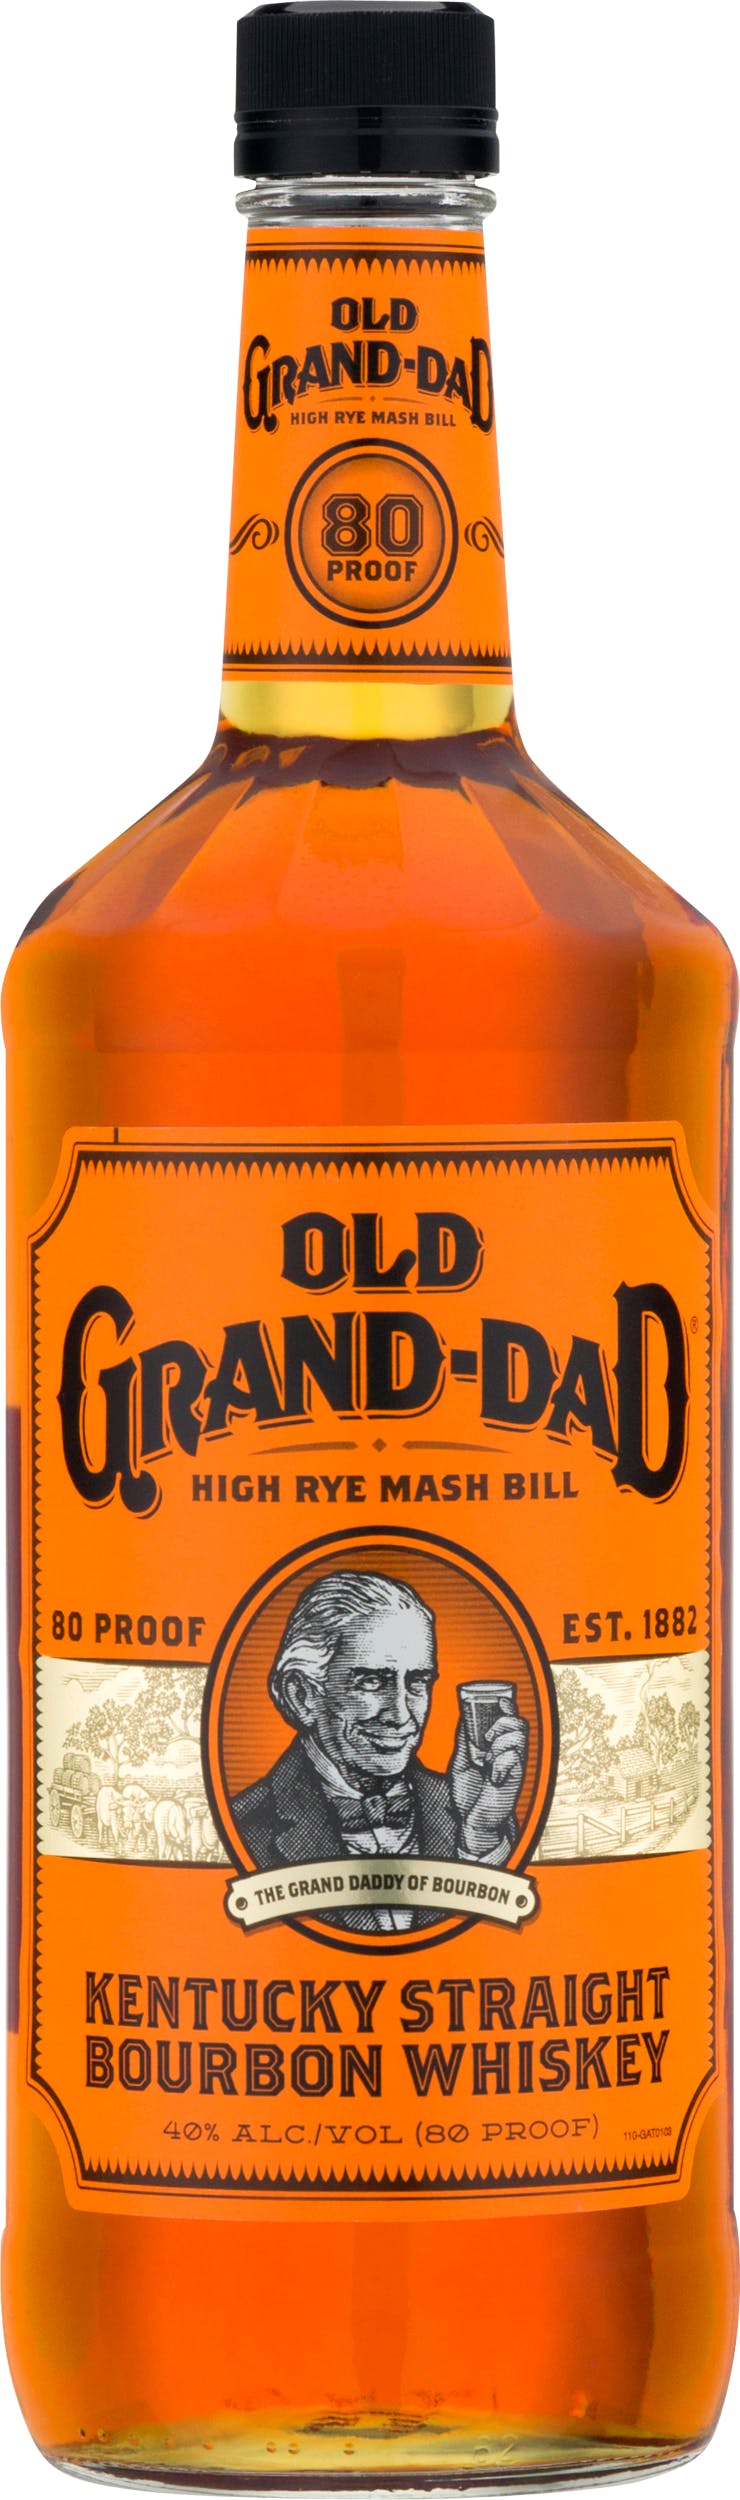 Old Grand-Dad Kentucky Straight Bourbon Whiskey 80 Proof 1L